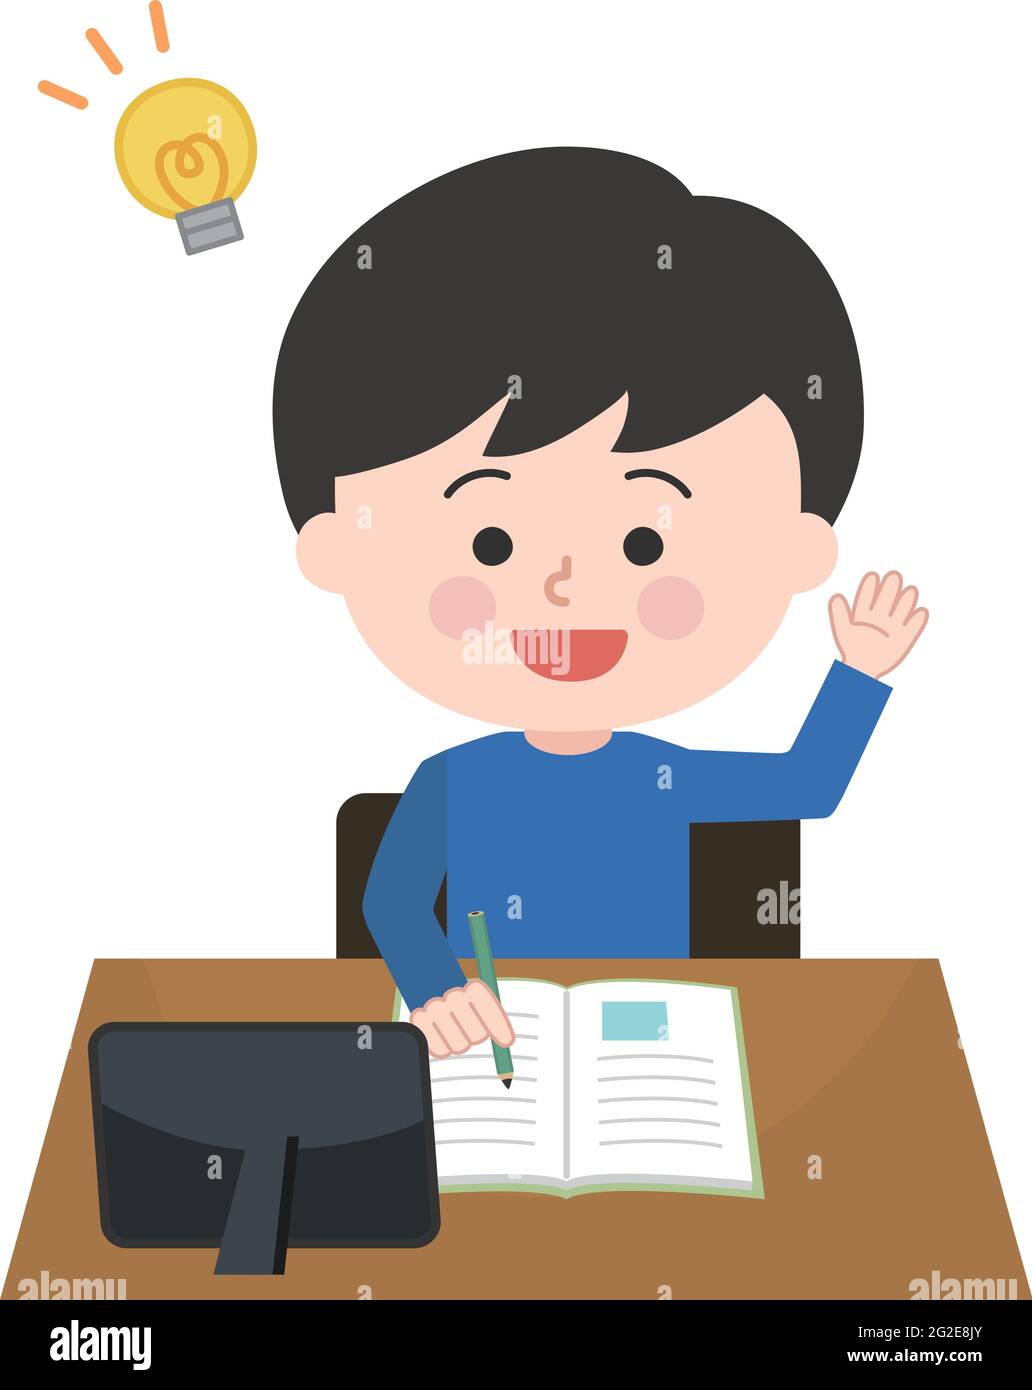 A boy has distance learning on his tablet. Vector illustration isolated on white background. Stock Vector